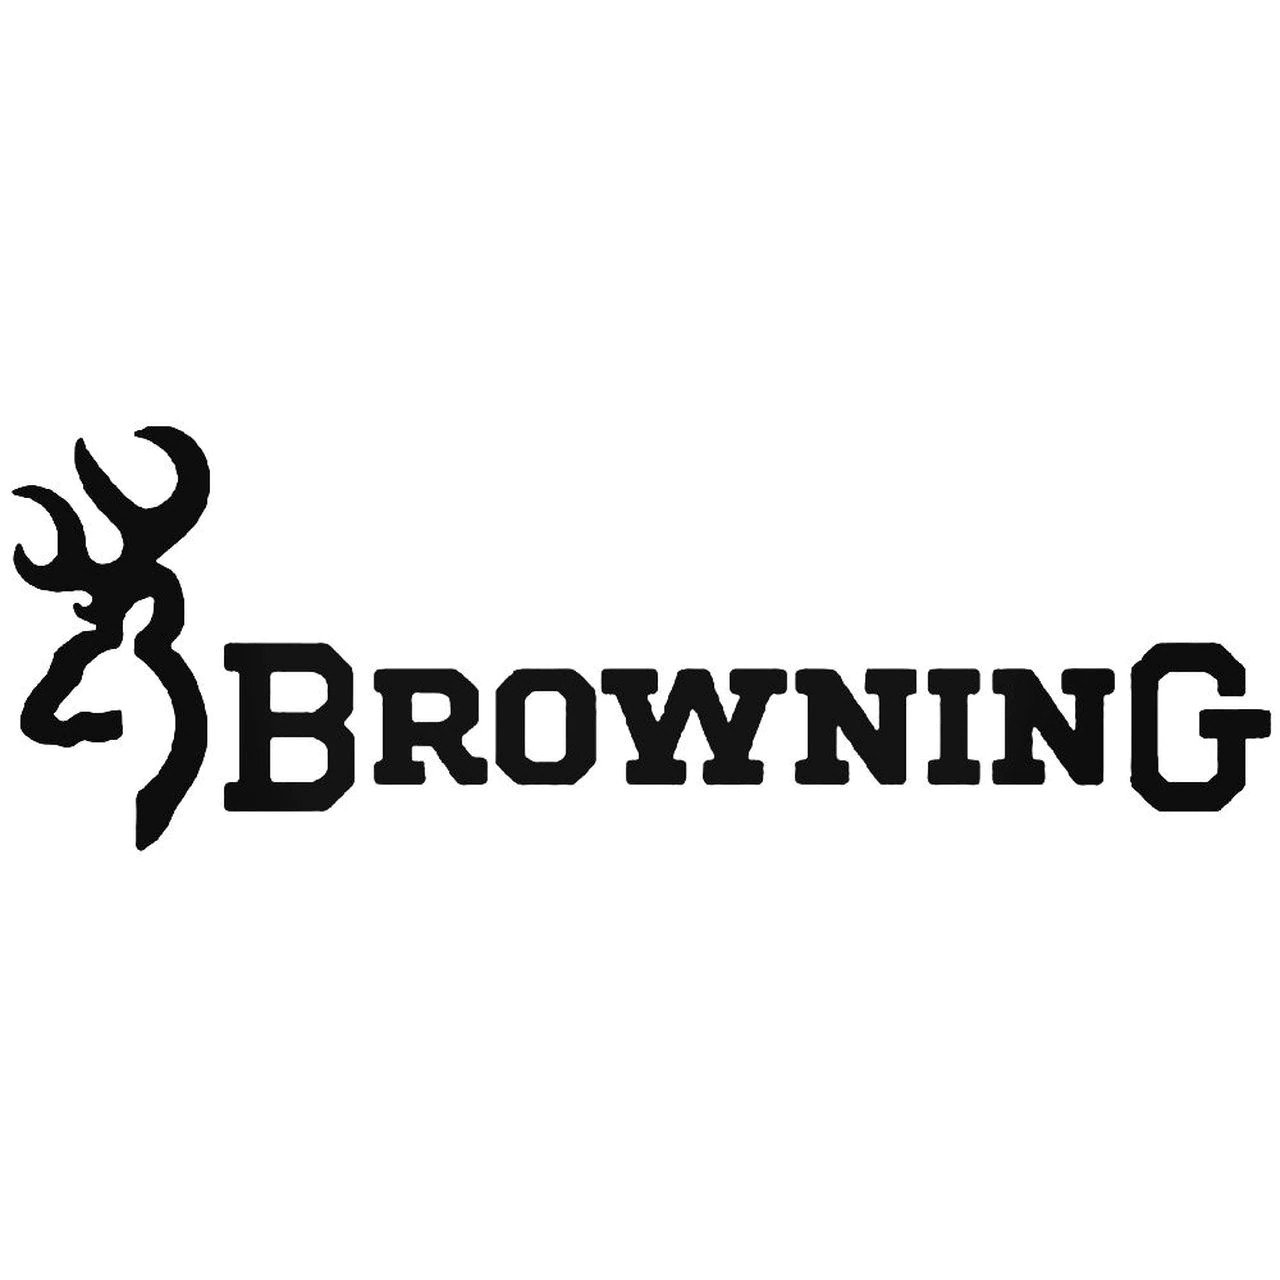 Browning Firearms